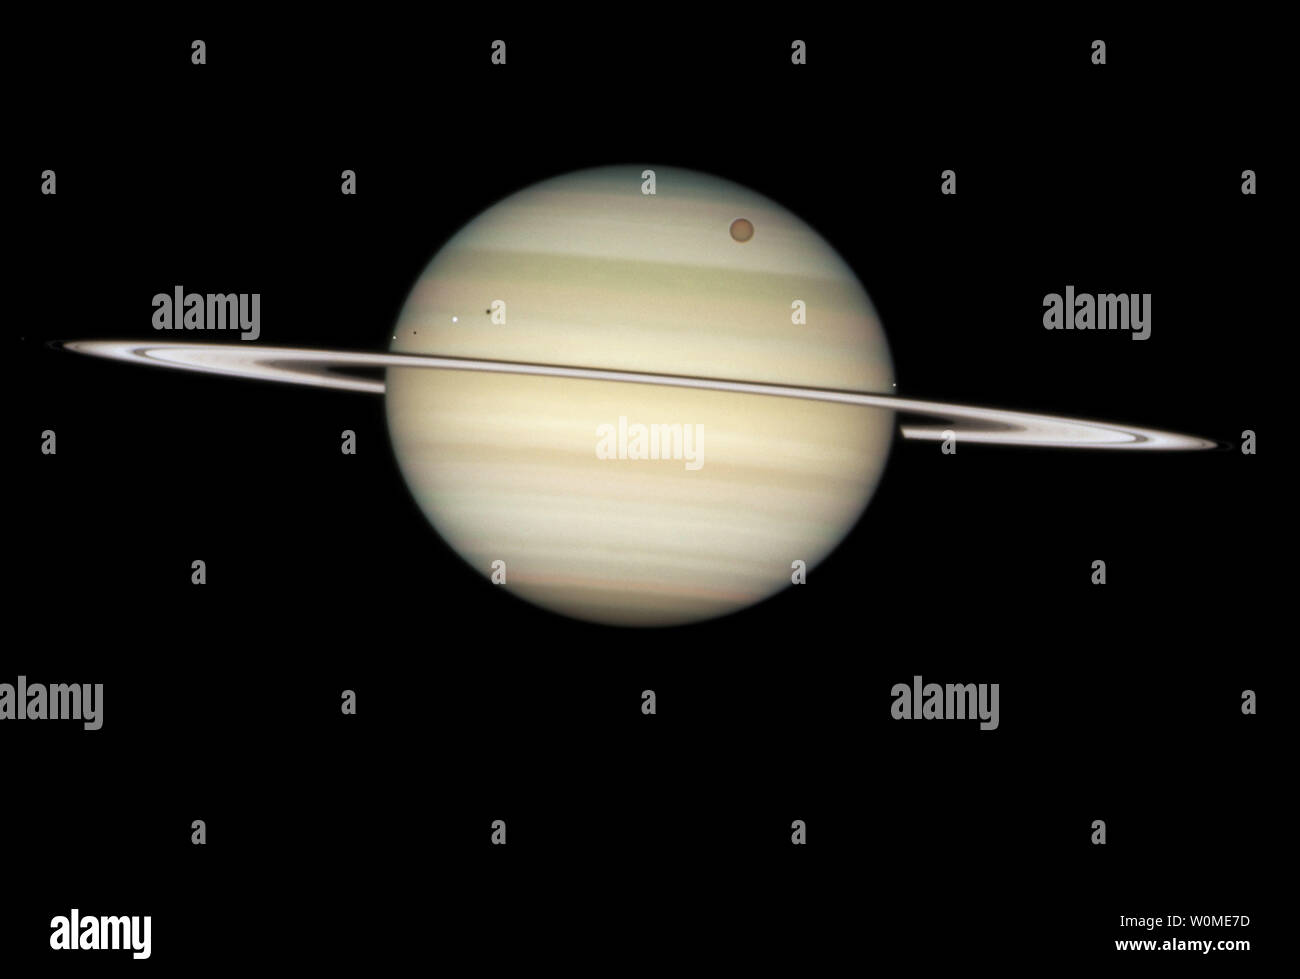 On February 24, 2009, the NASA/ESA Hubble Space Telescope captured a photo sequence of four moons of Saturn passing in front of their parent planet. The moons, from far left to right, are the white icy moons Enceladus and Dione, the large orange moon Titan, and icy Mimas. Due to the angle of the Sun, they are each preceded by their own shadow.   (UPI PHoto/NASA, ESA and the Hubble Heritage Team) Stock Photo